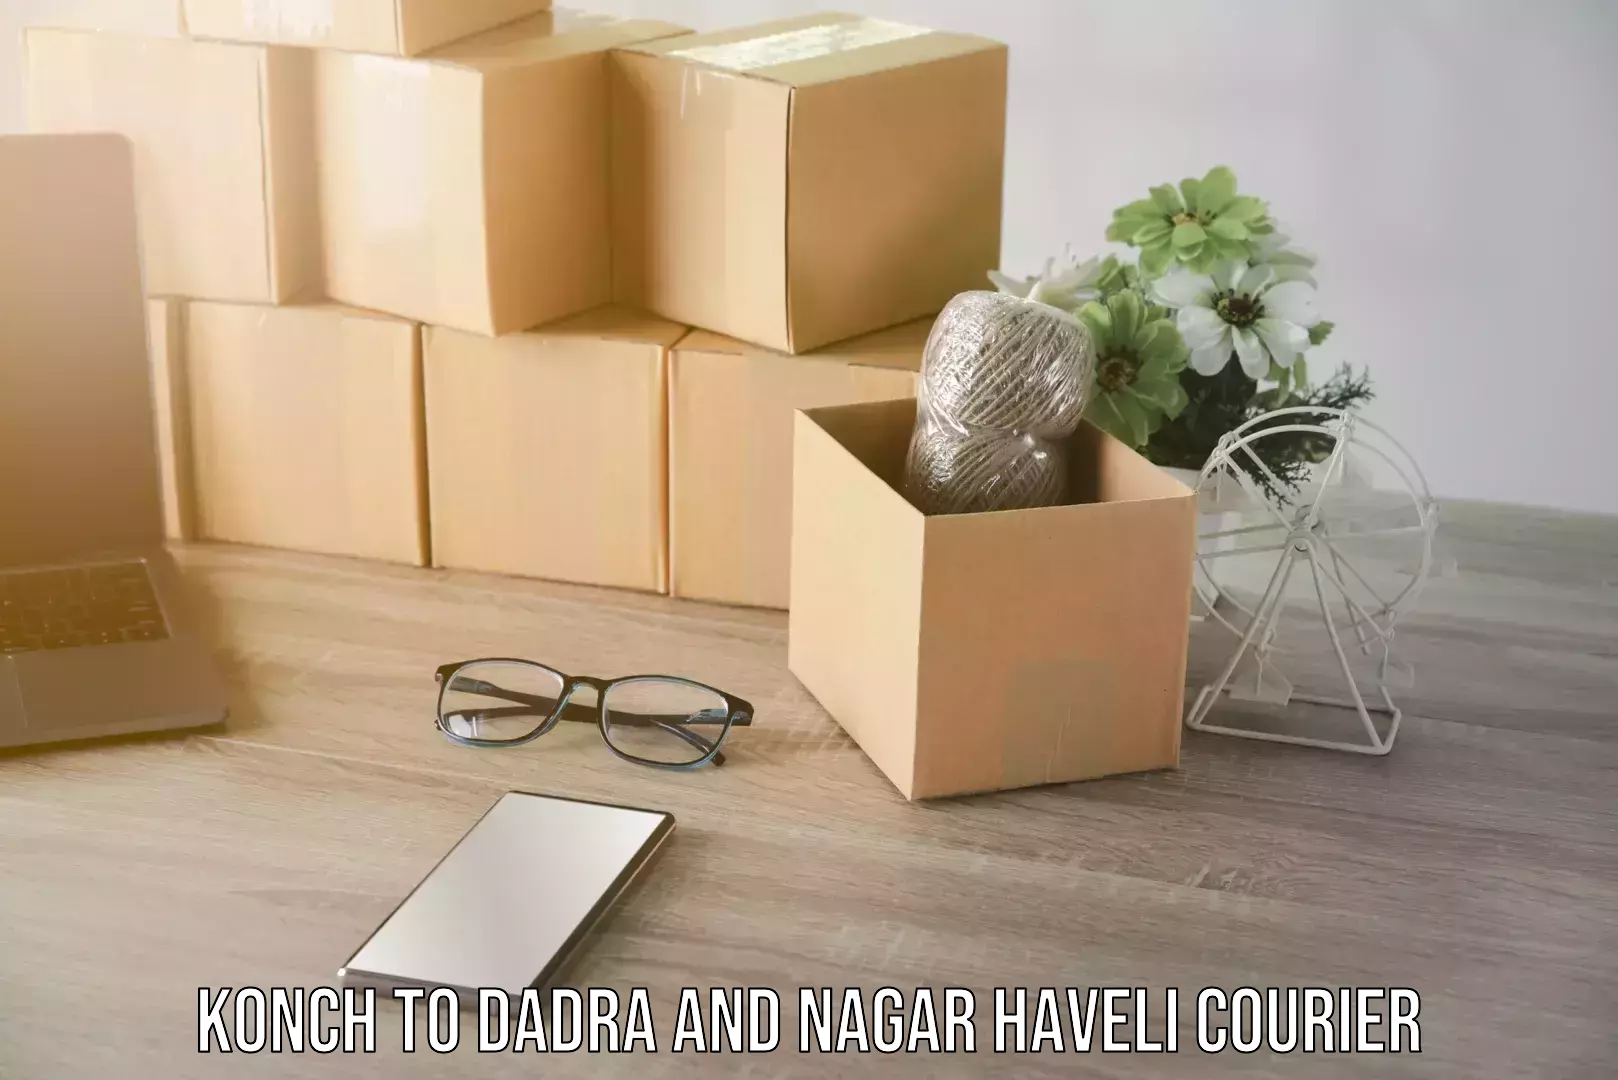 Residential moving experts Konch to Dadra and Nagar Haveli